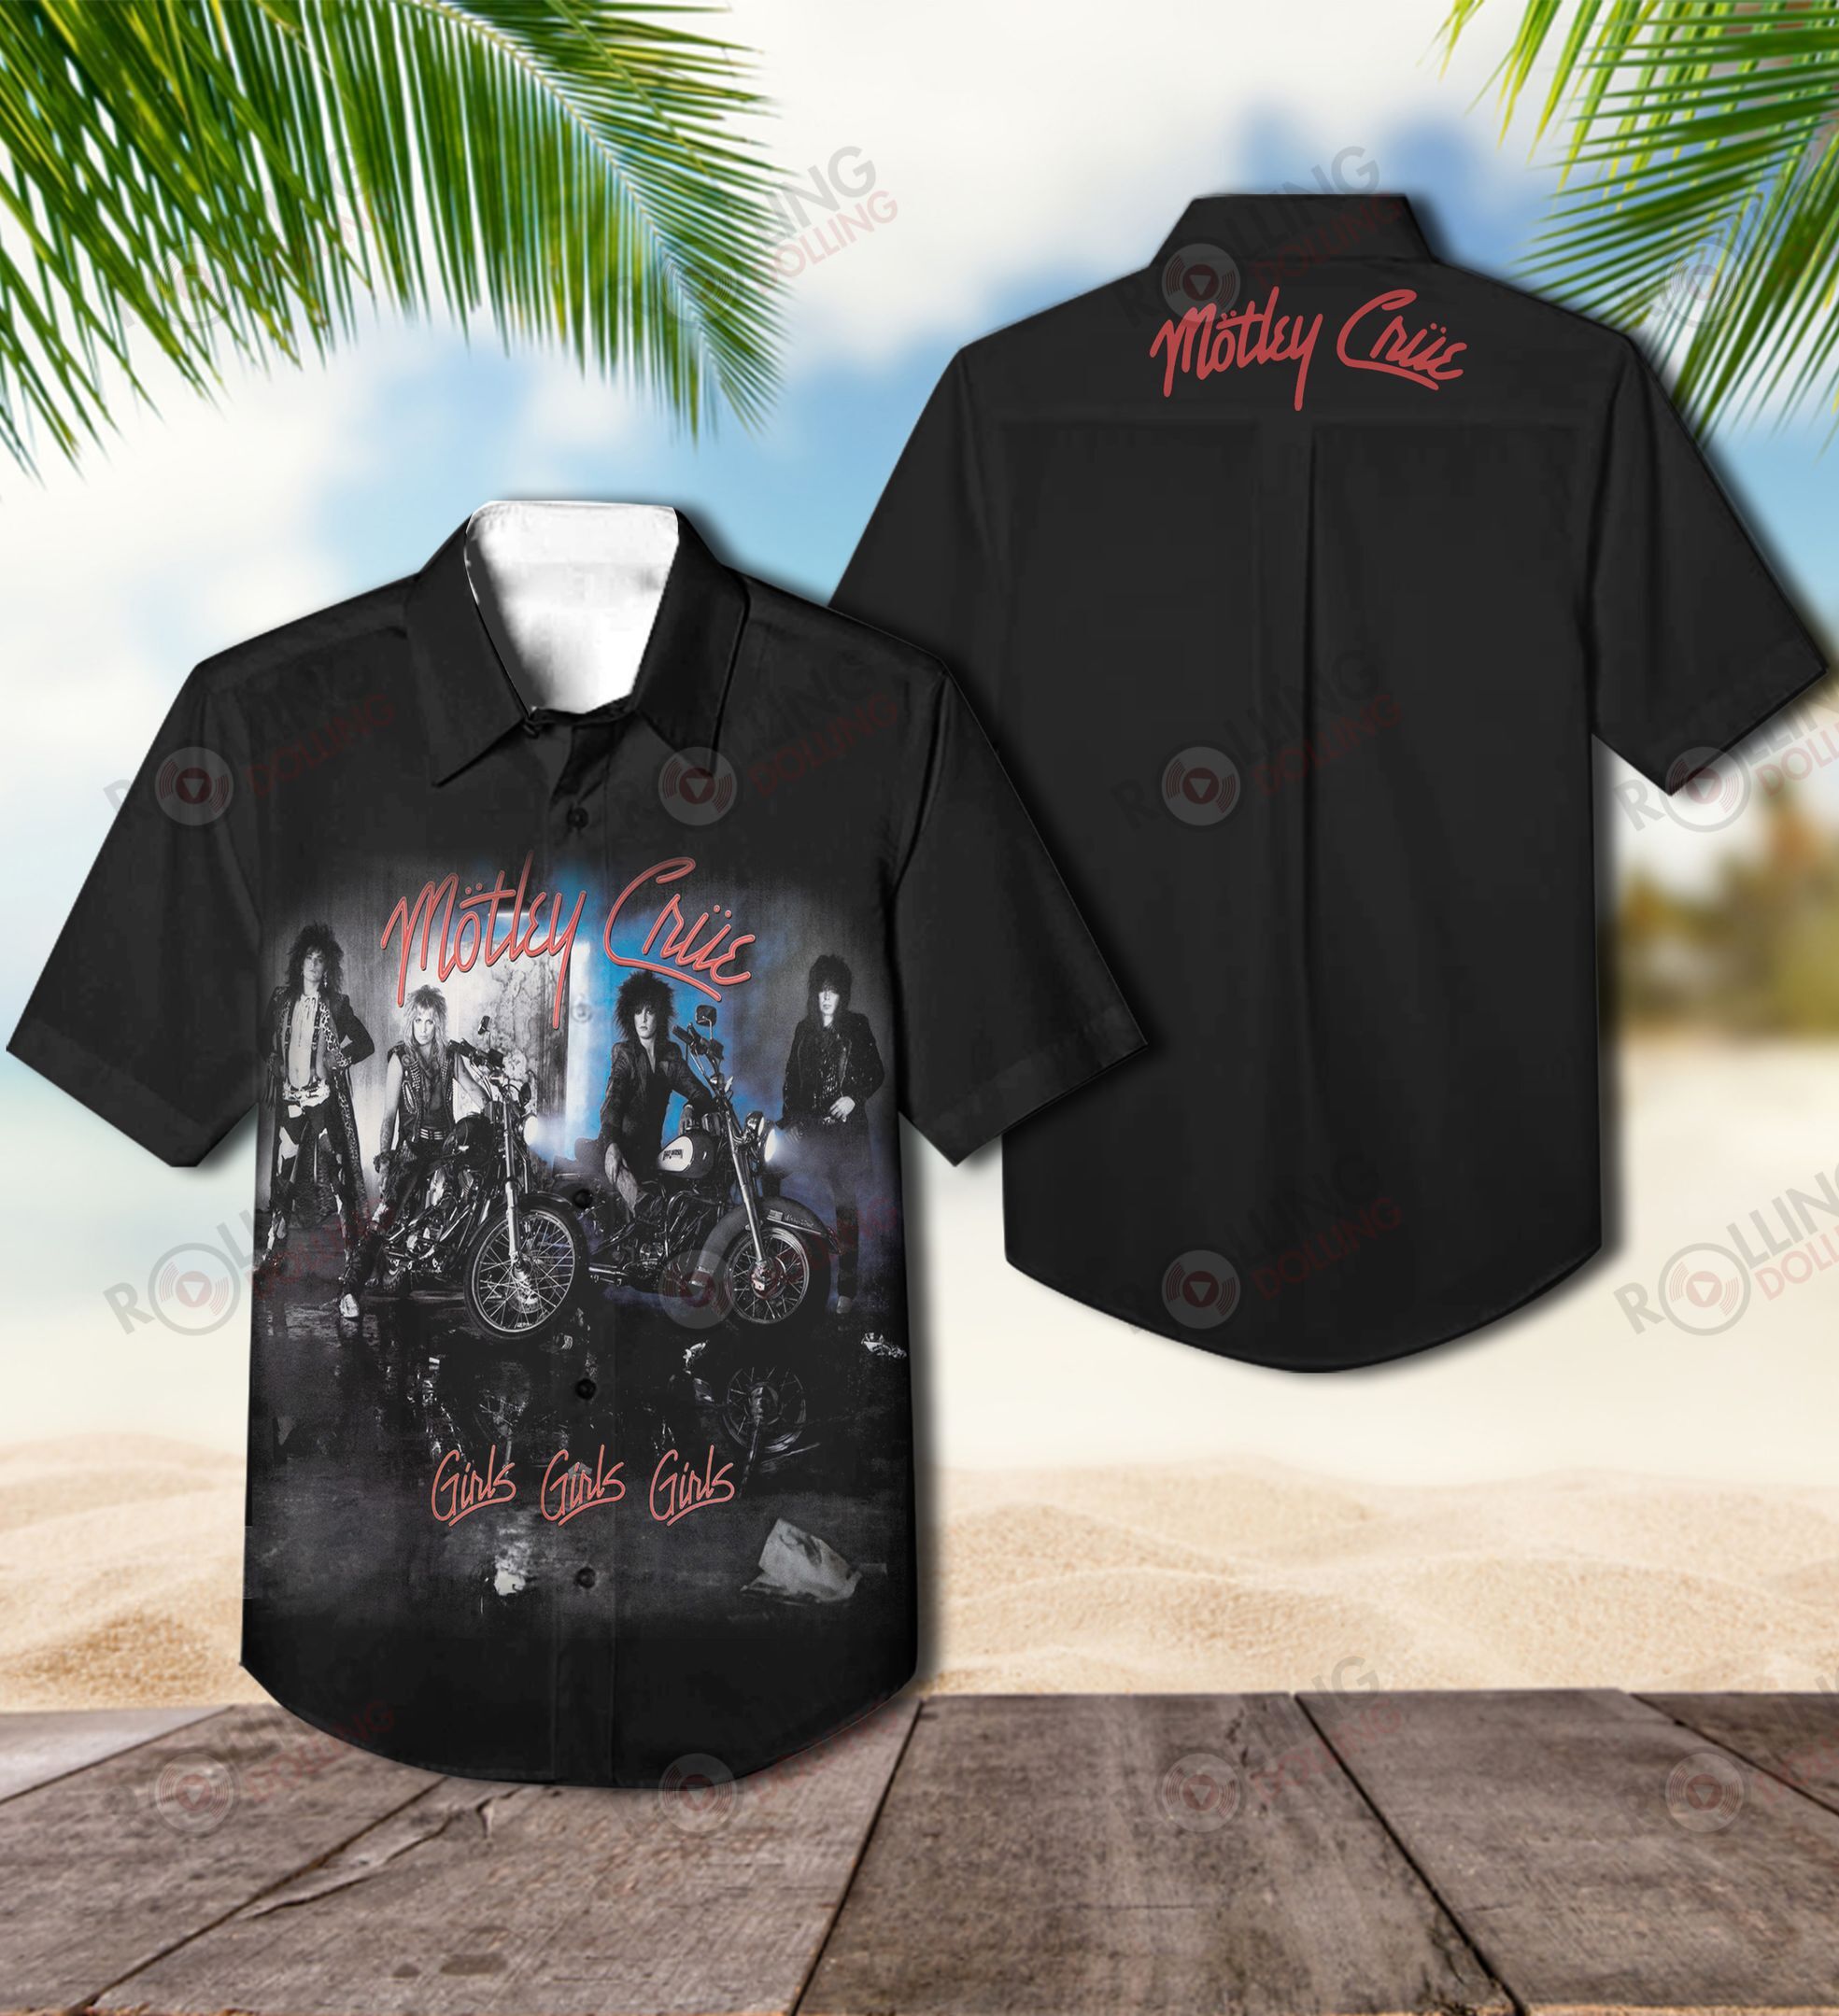 This would make a great gift for any fan who loves Hawaiian Shirt as well as Rock band 87